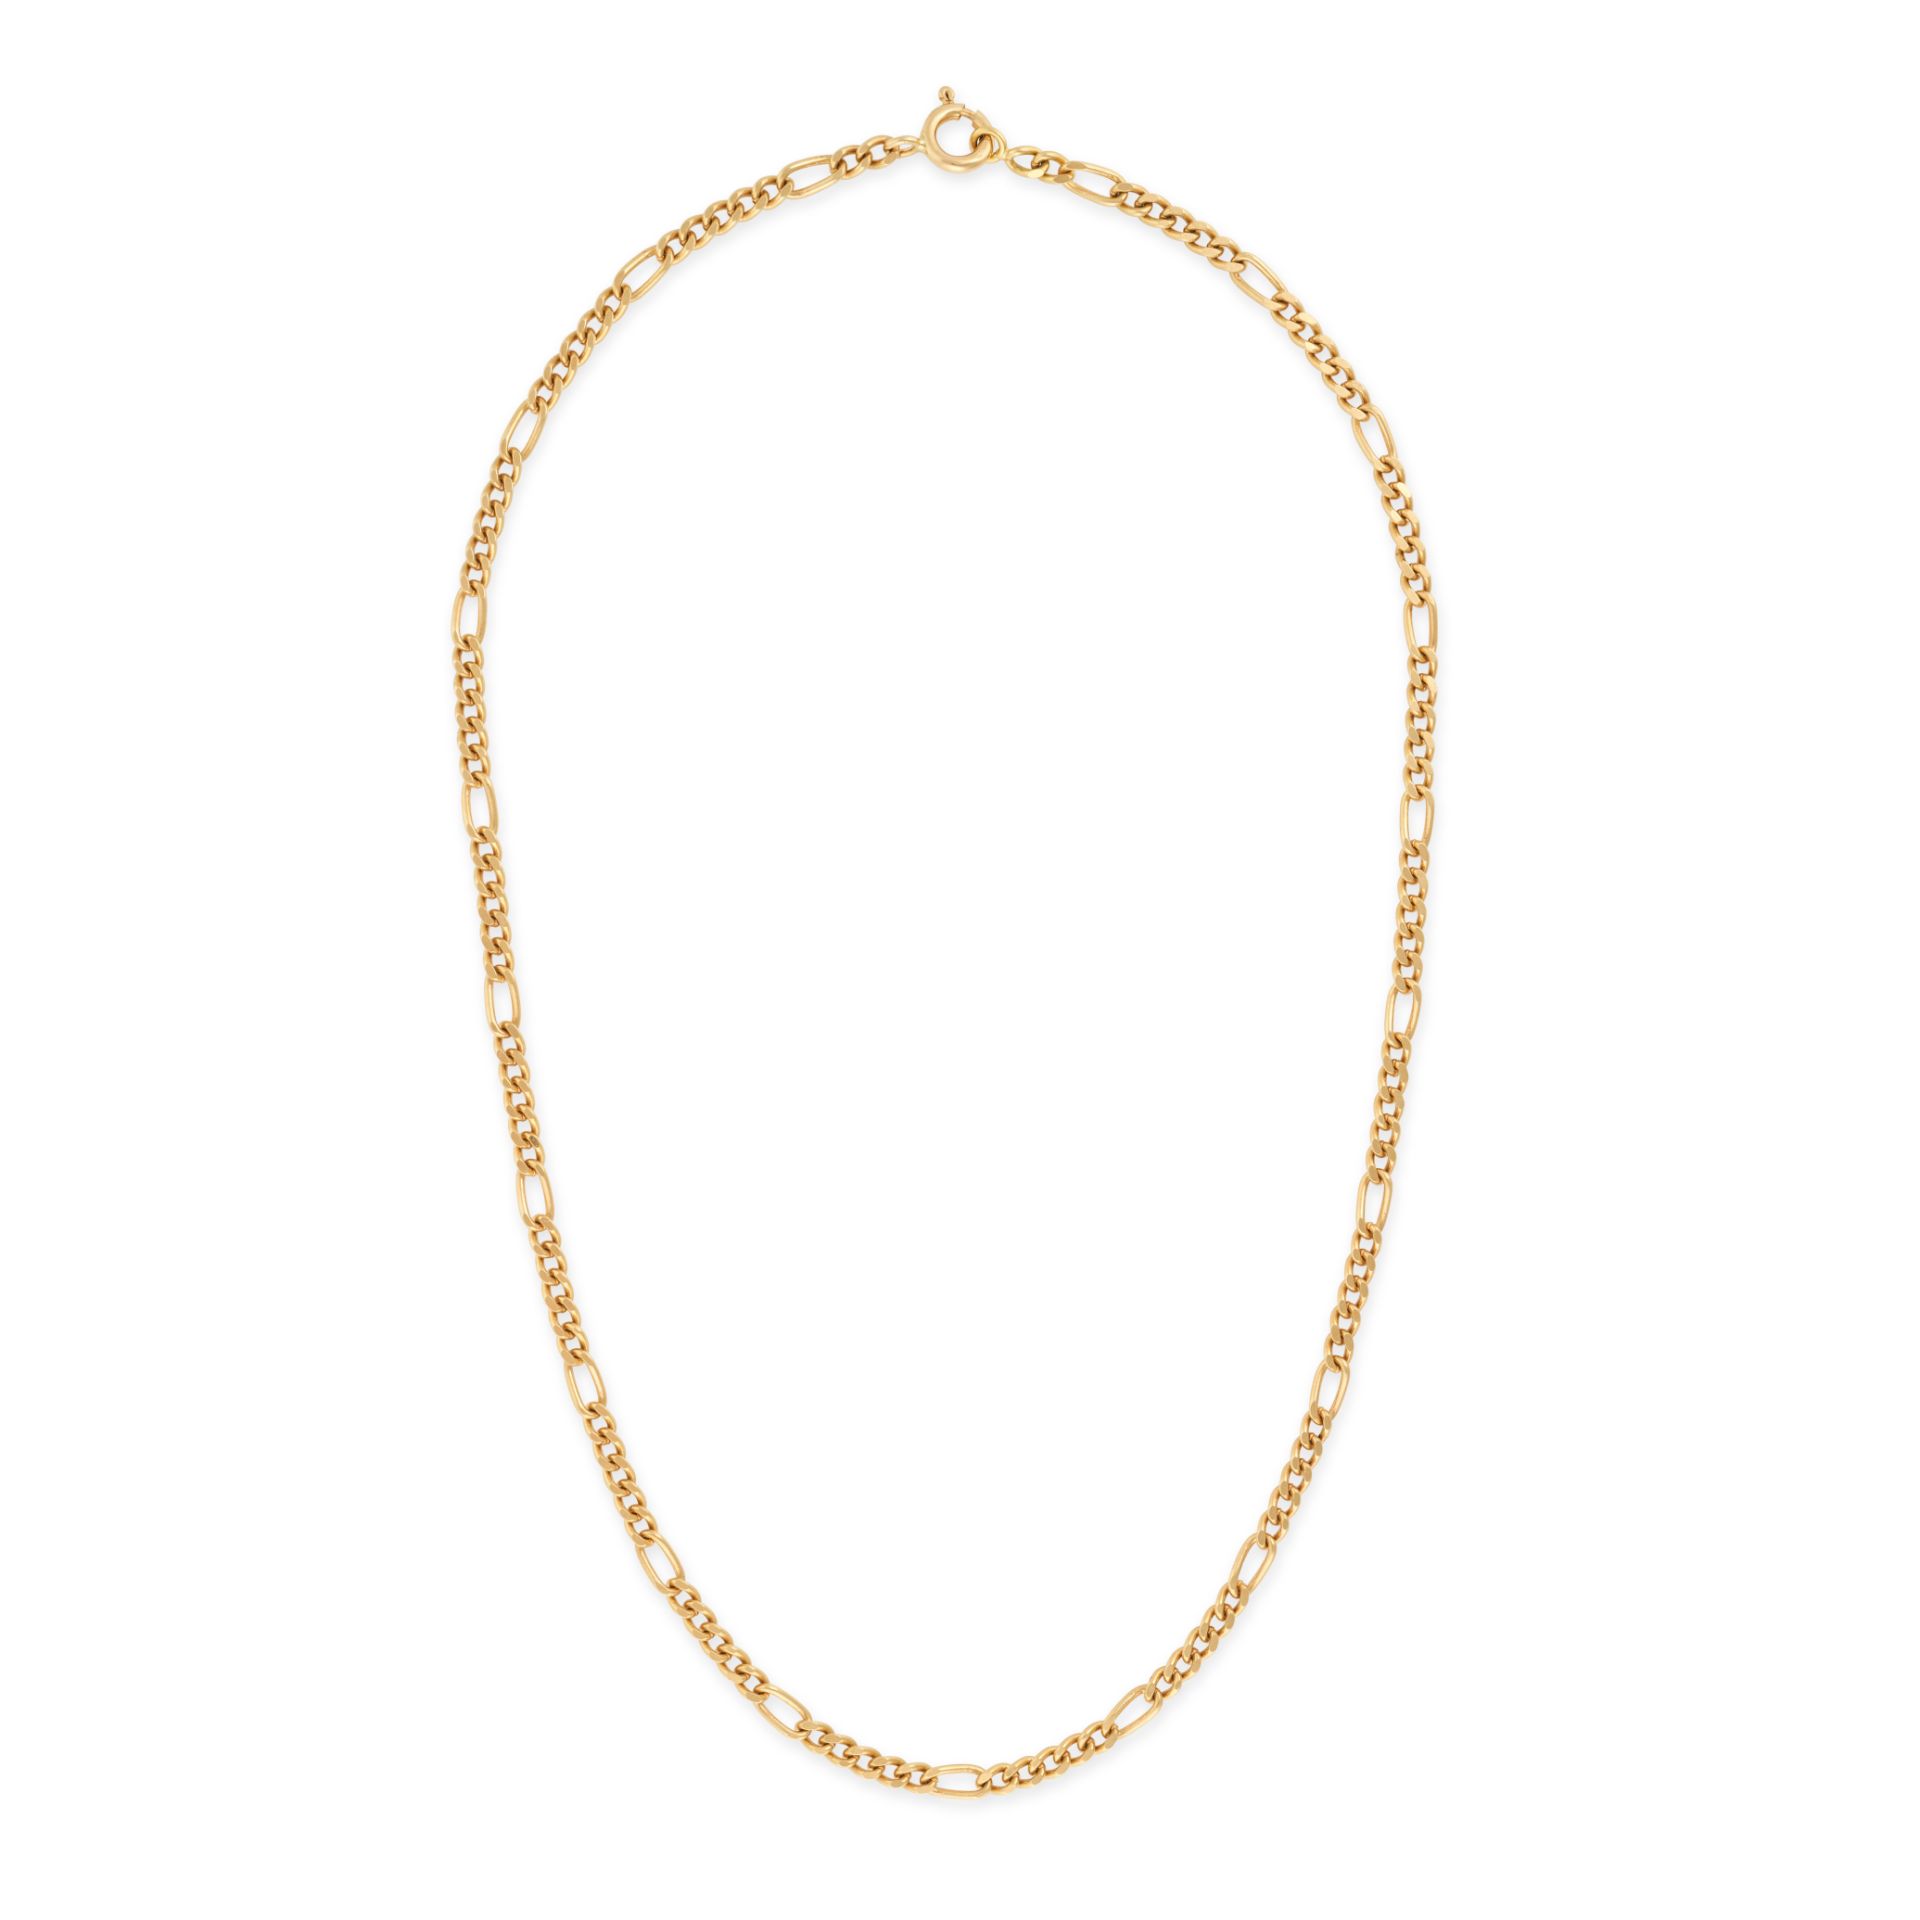 A FIGARO CHAIN NECKLACE comprising a row of figaro links, stamped 750, 46.0cm, 17.7g.